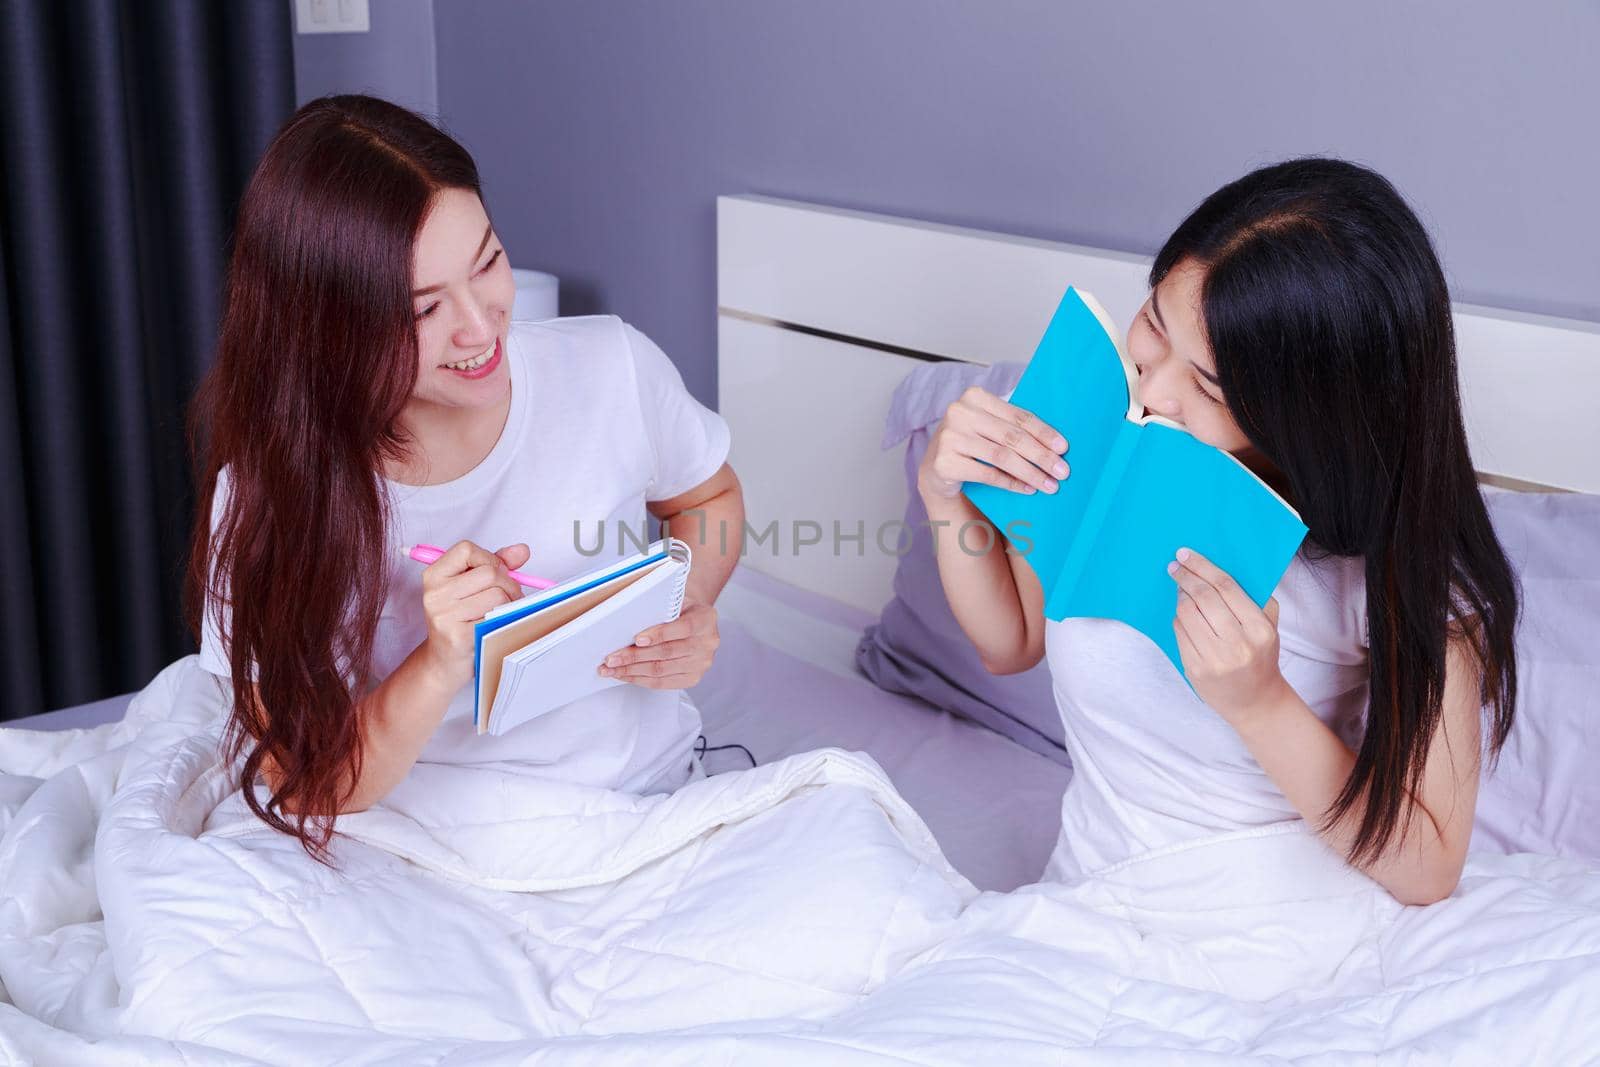 two woman writing and reading a book on bed in the bedroom